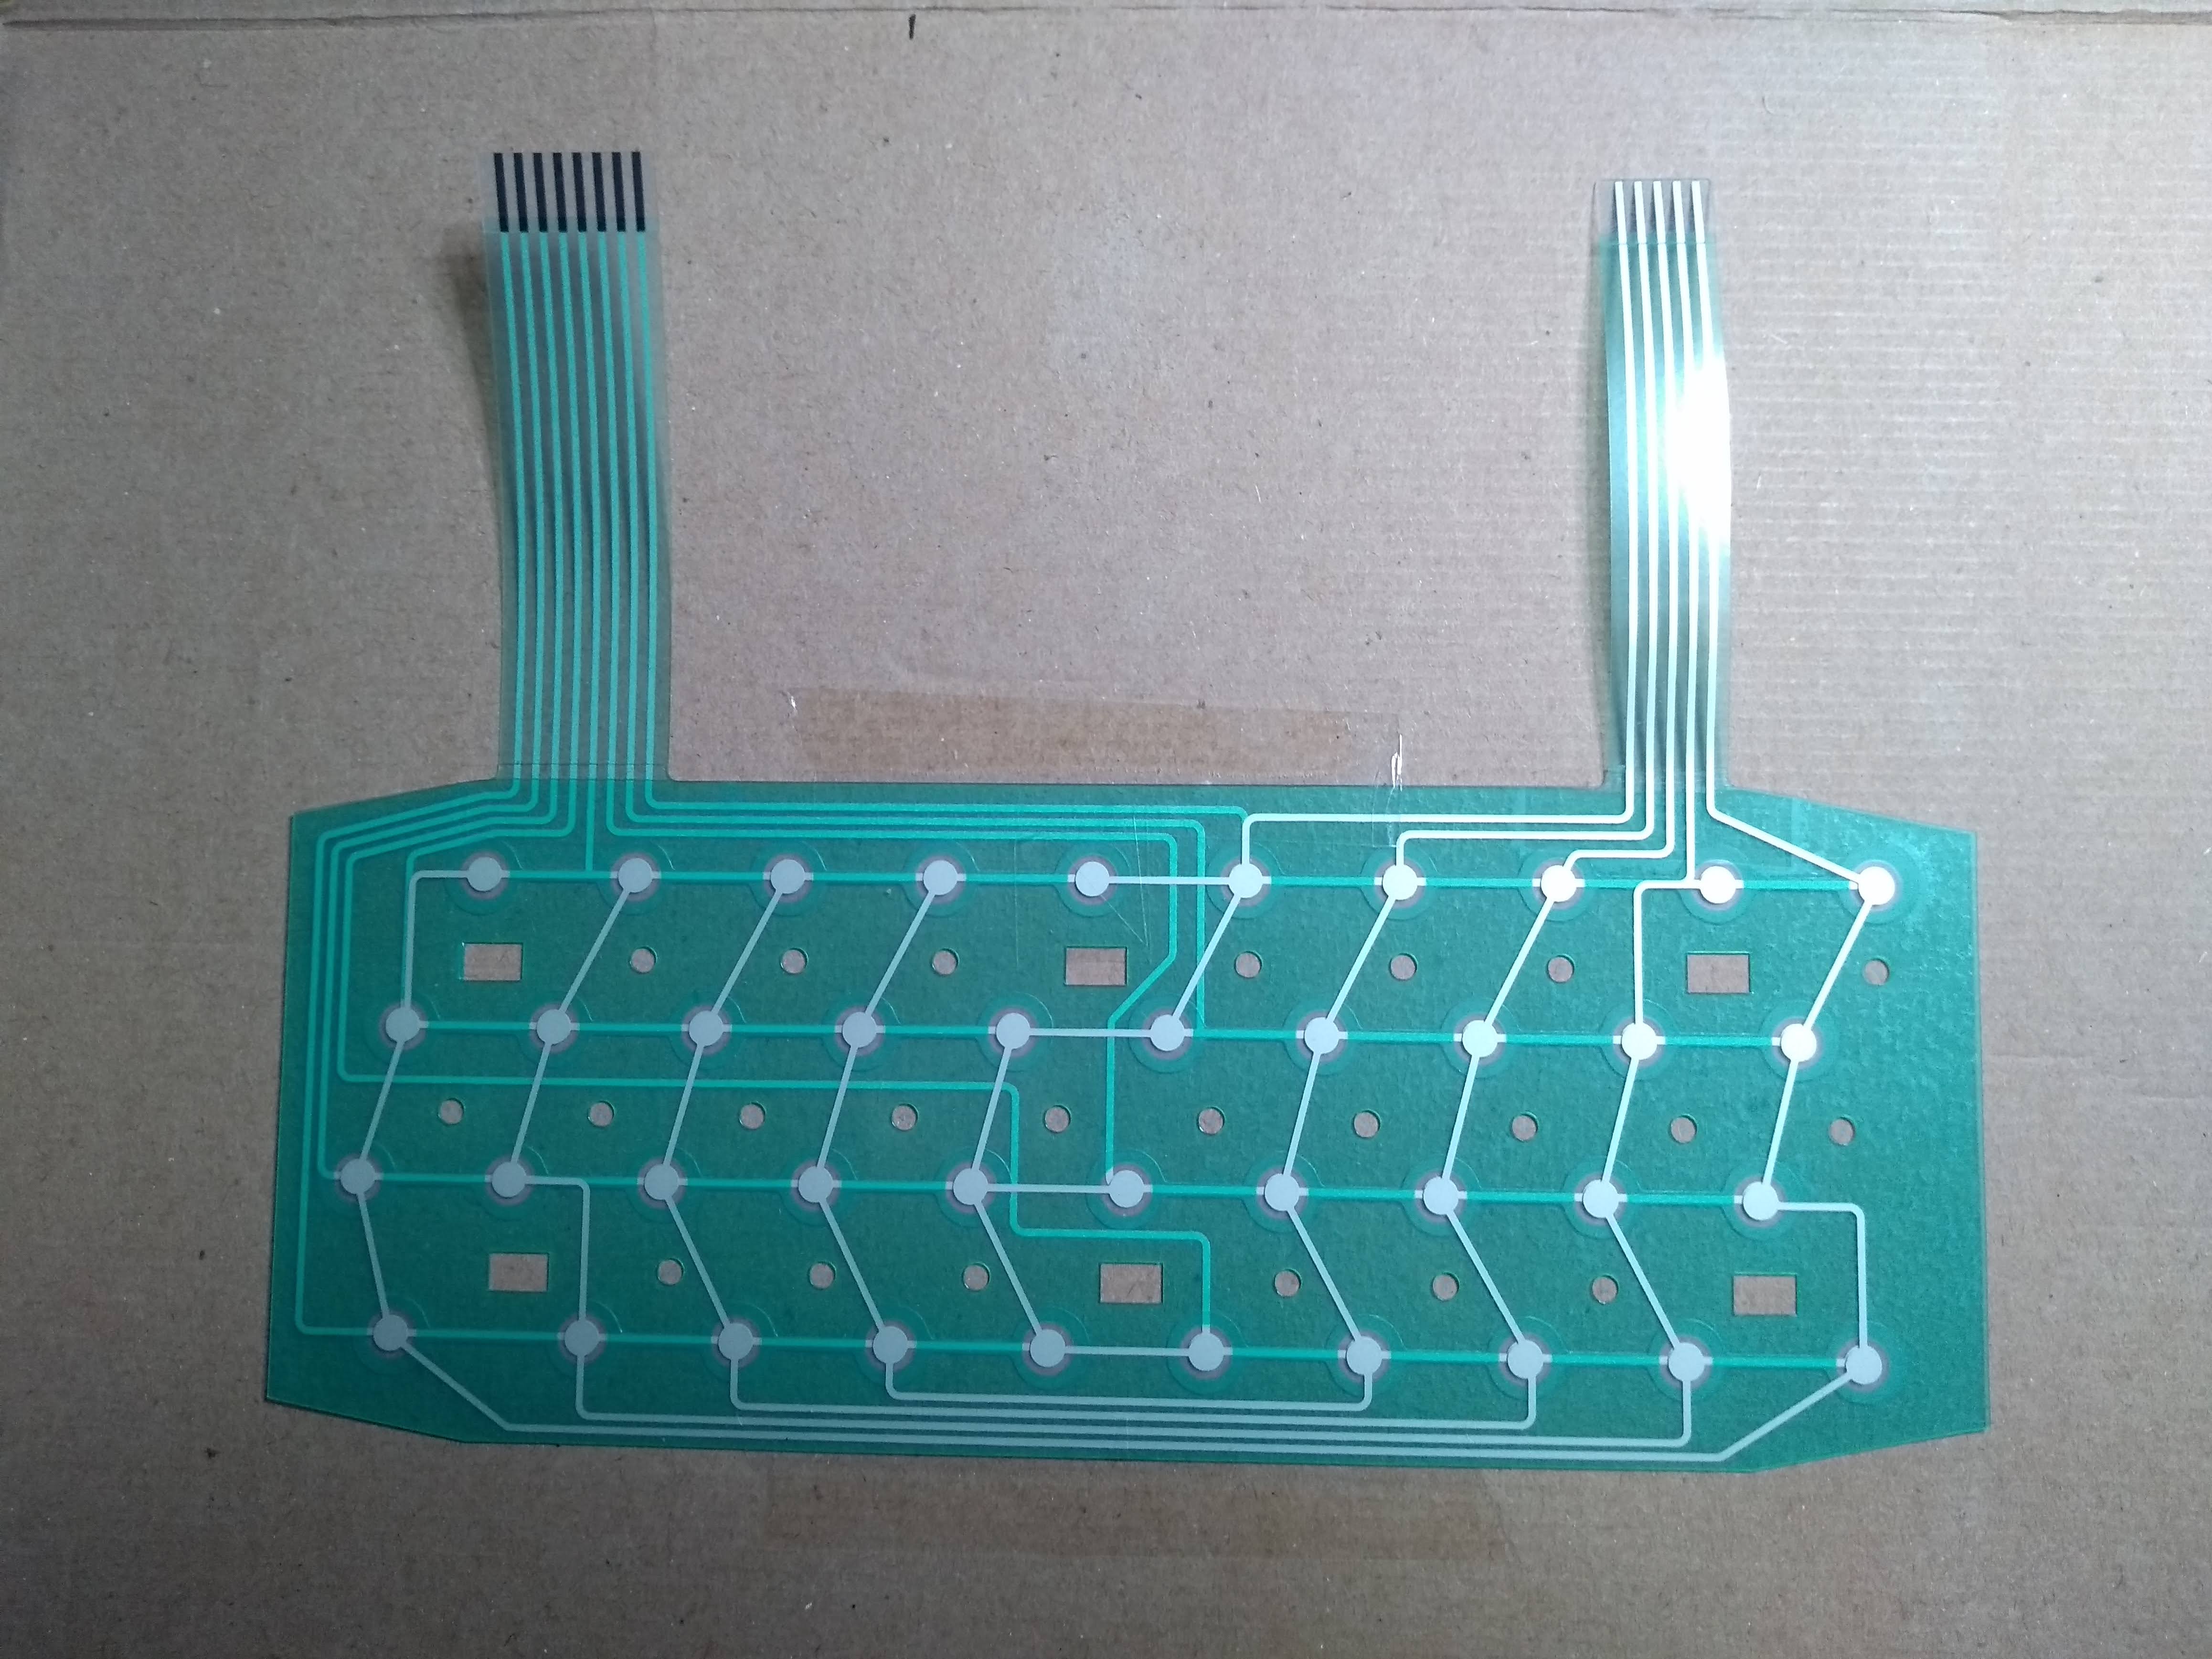 ZX Spectrum computer keyboard membrane; between two thing sheets of flexible plastic are all the metal connectors you need to make a flat 40-key keyboard. Quite delicate